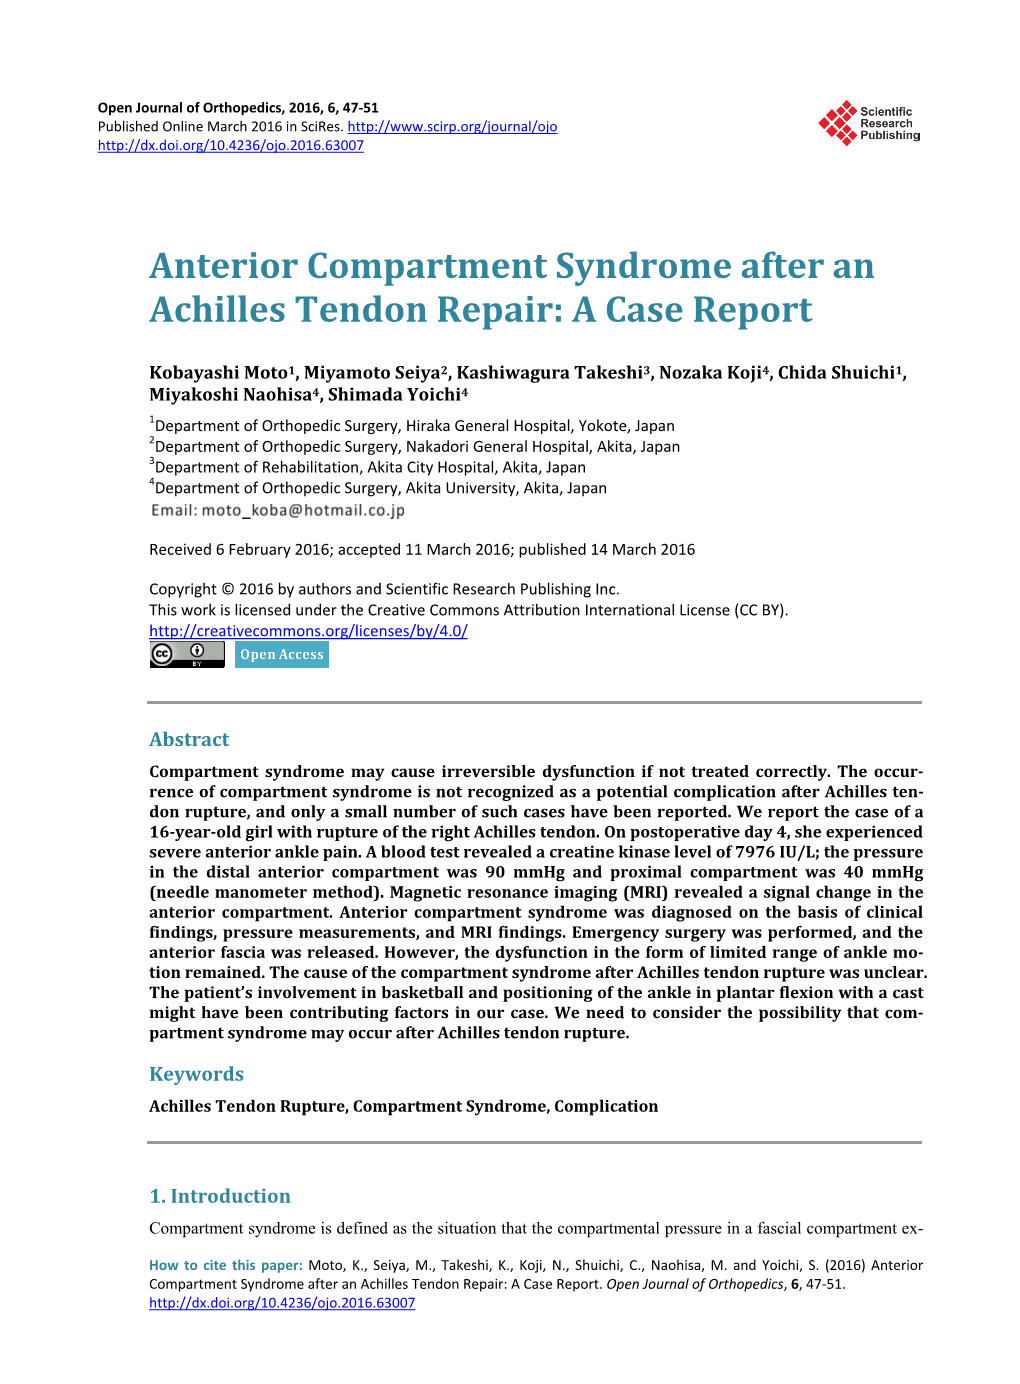 Anterior Compartment Syndrome After an Achilles Tendon Repair: a Case Report